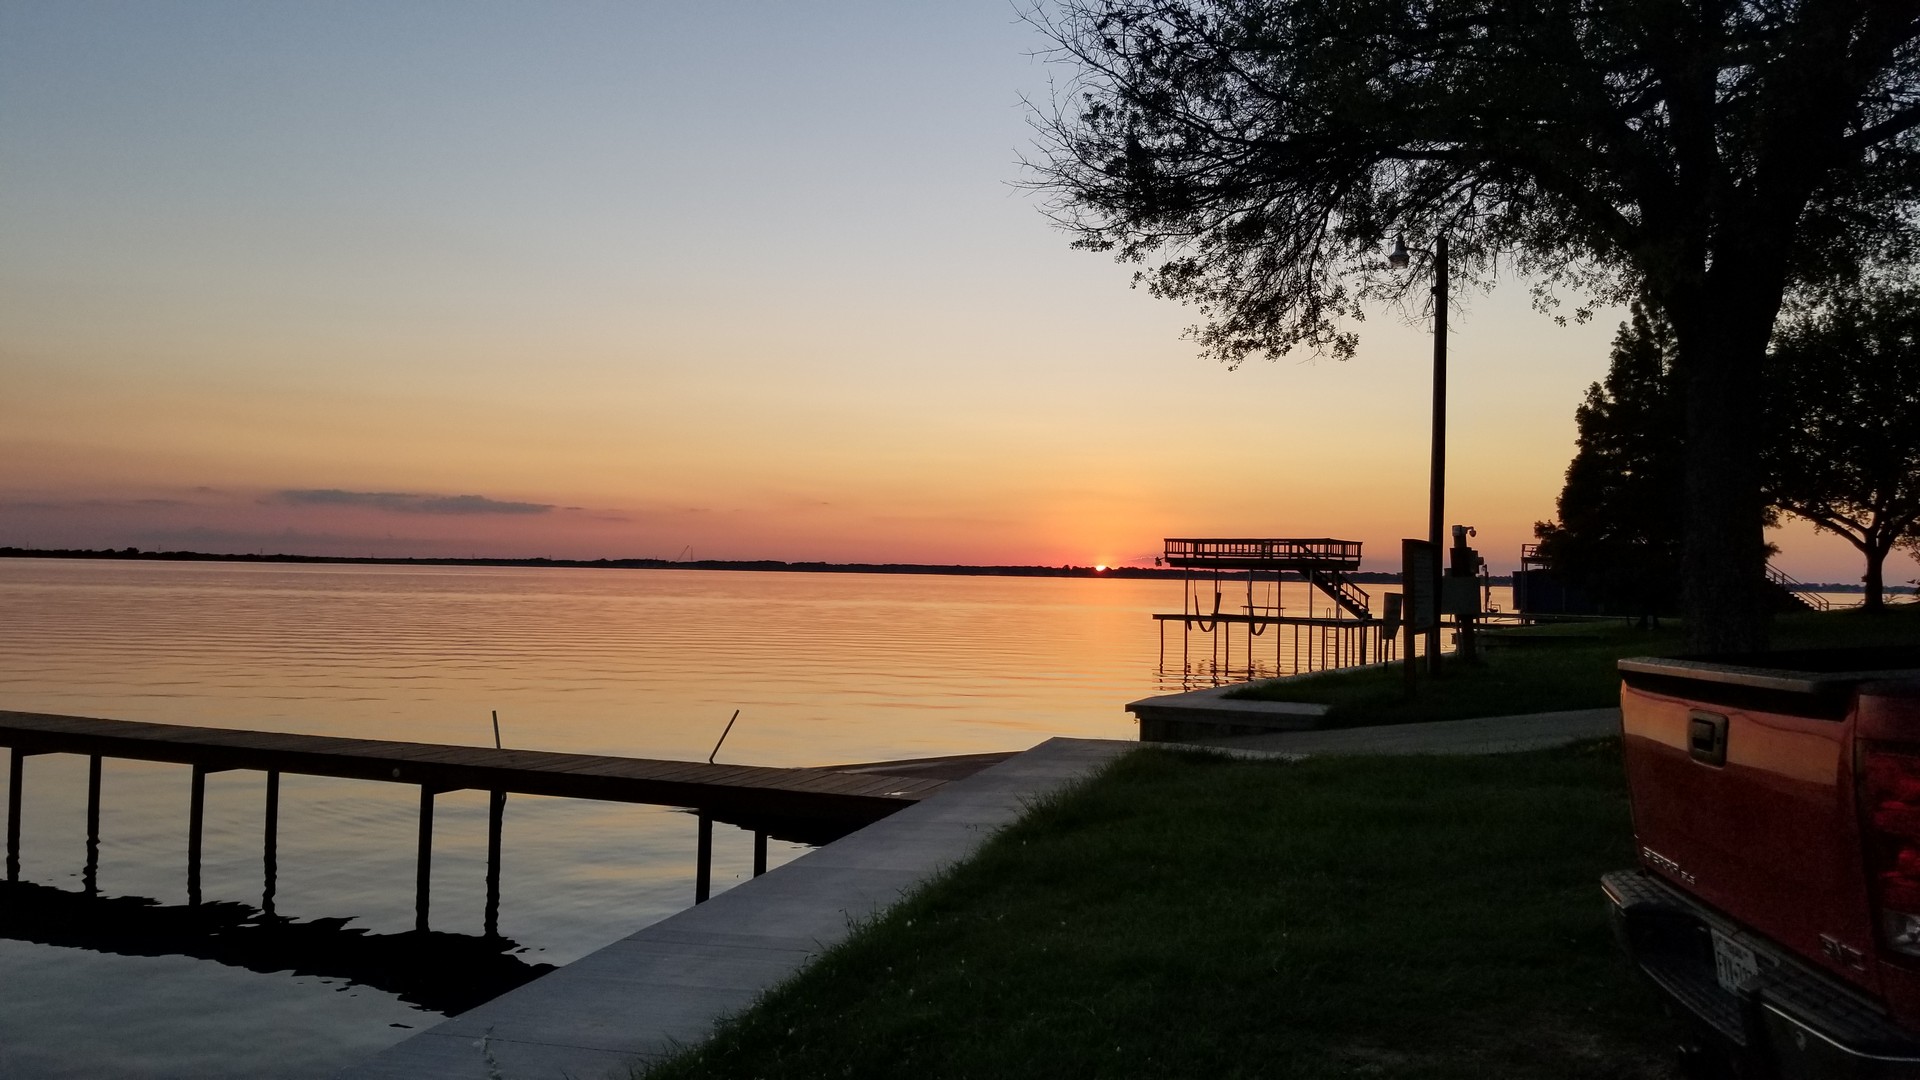 Image: Sunset at the boat dock